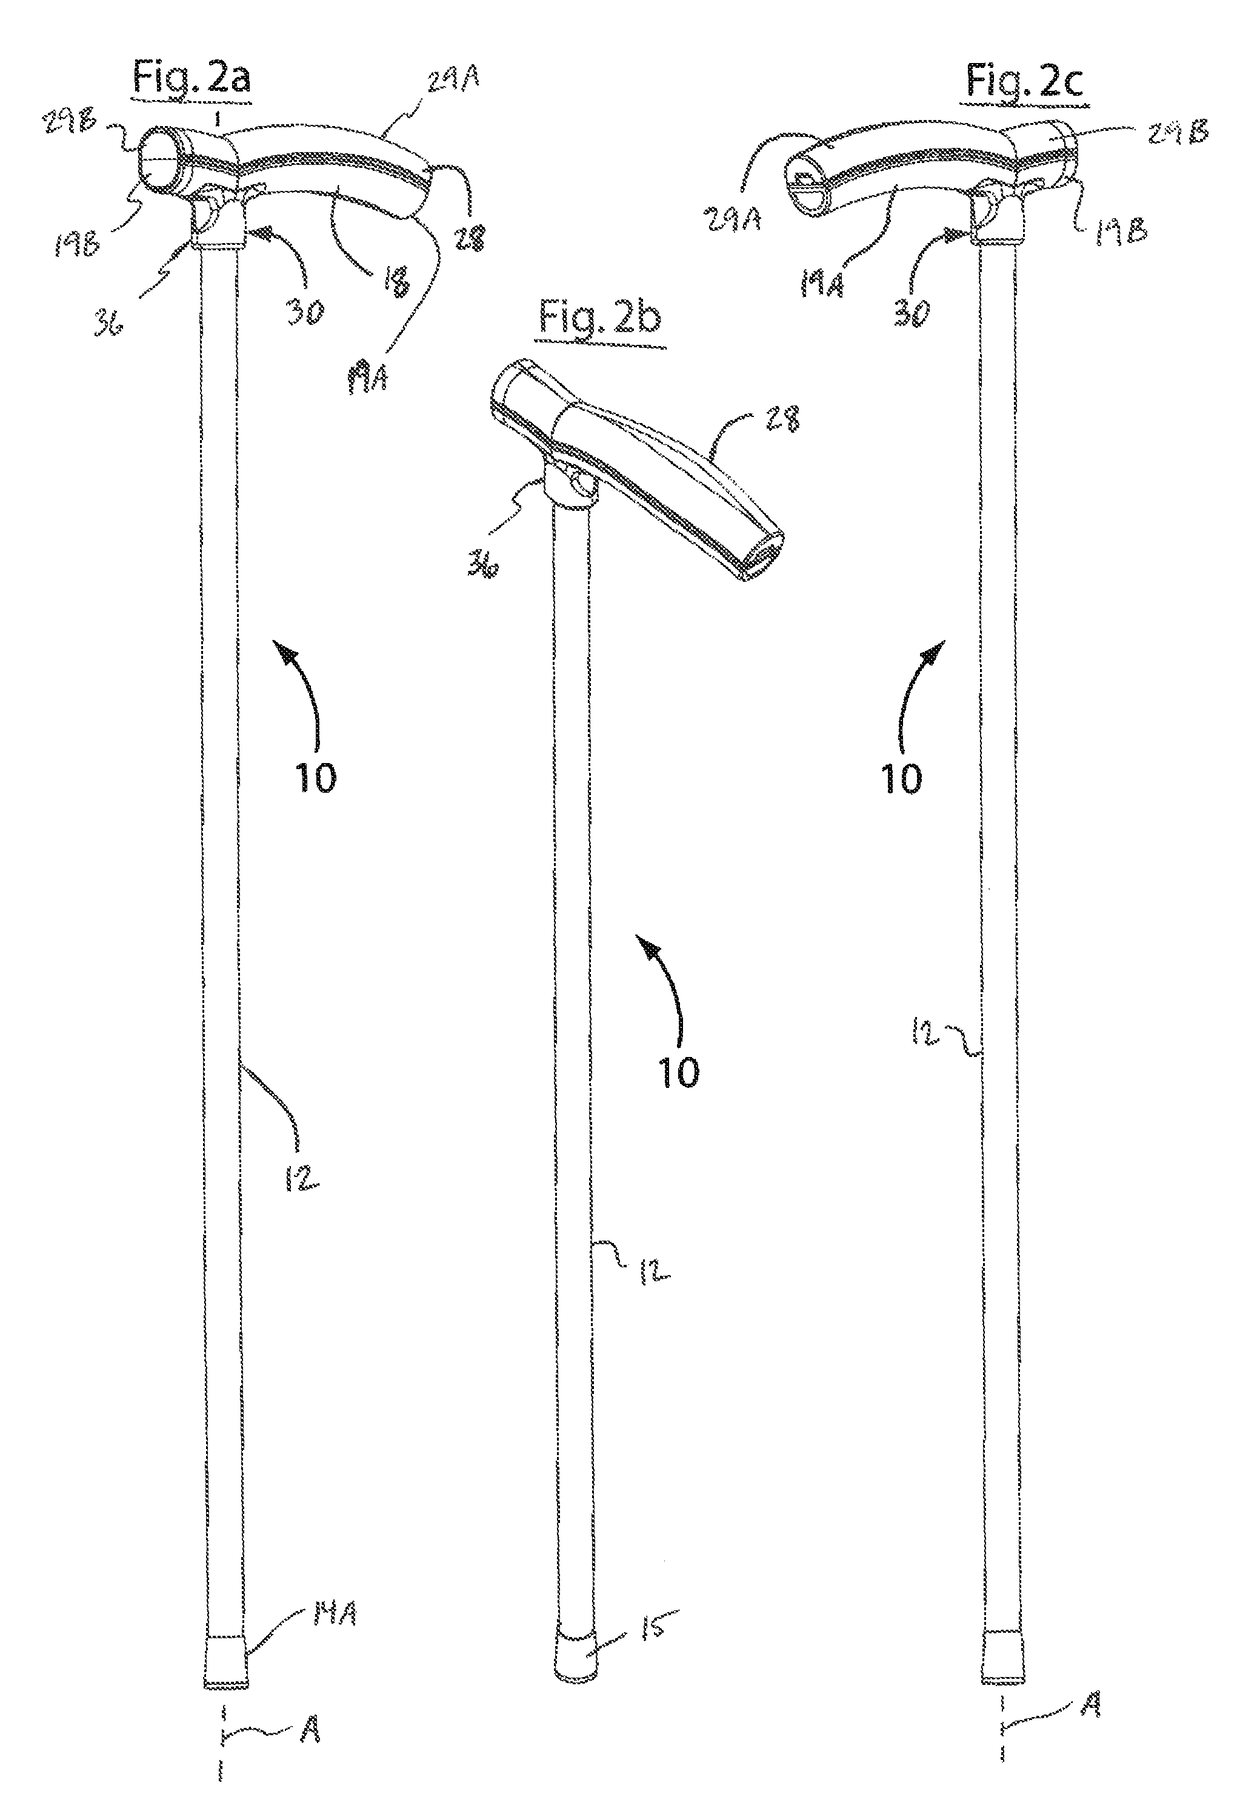 Apparatus for aiding mobility of a user